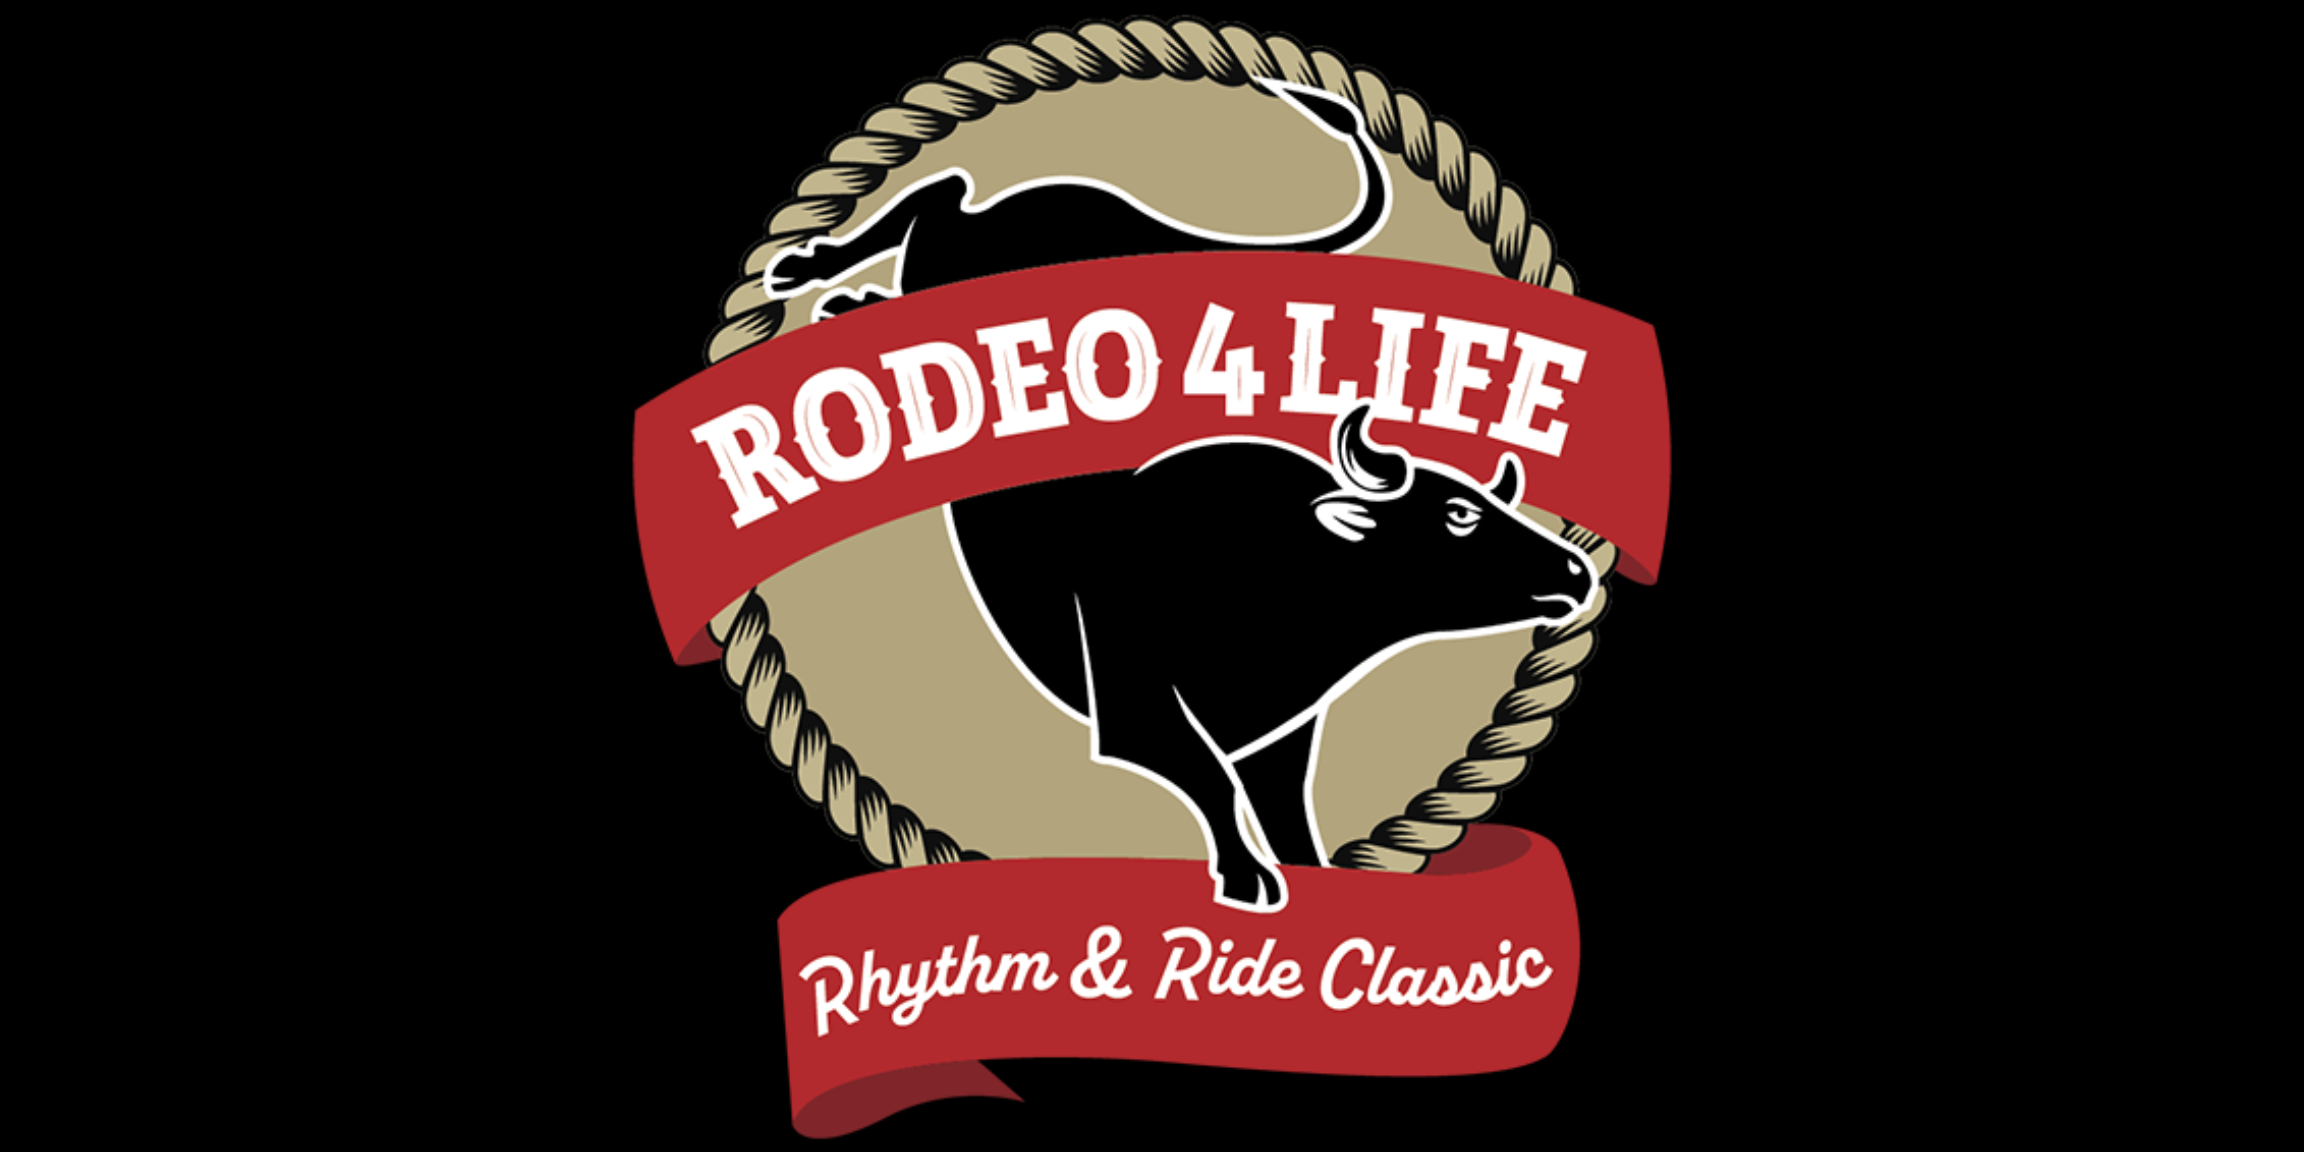 Rodeo 4 Life